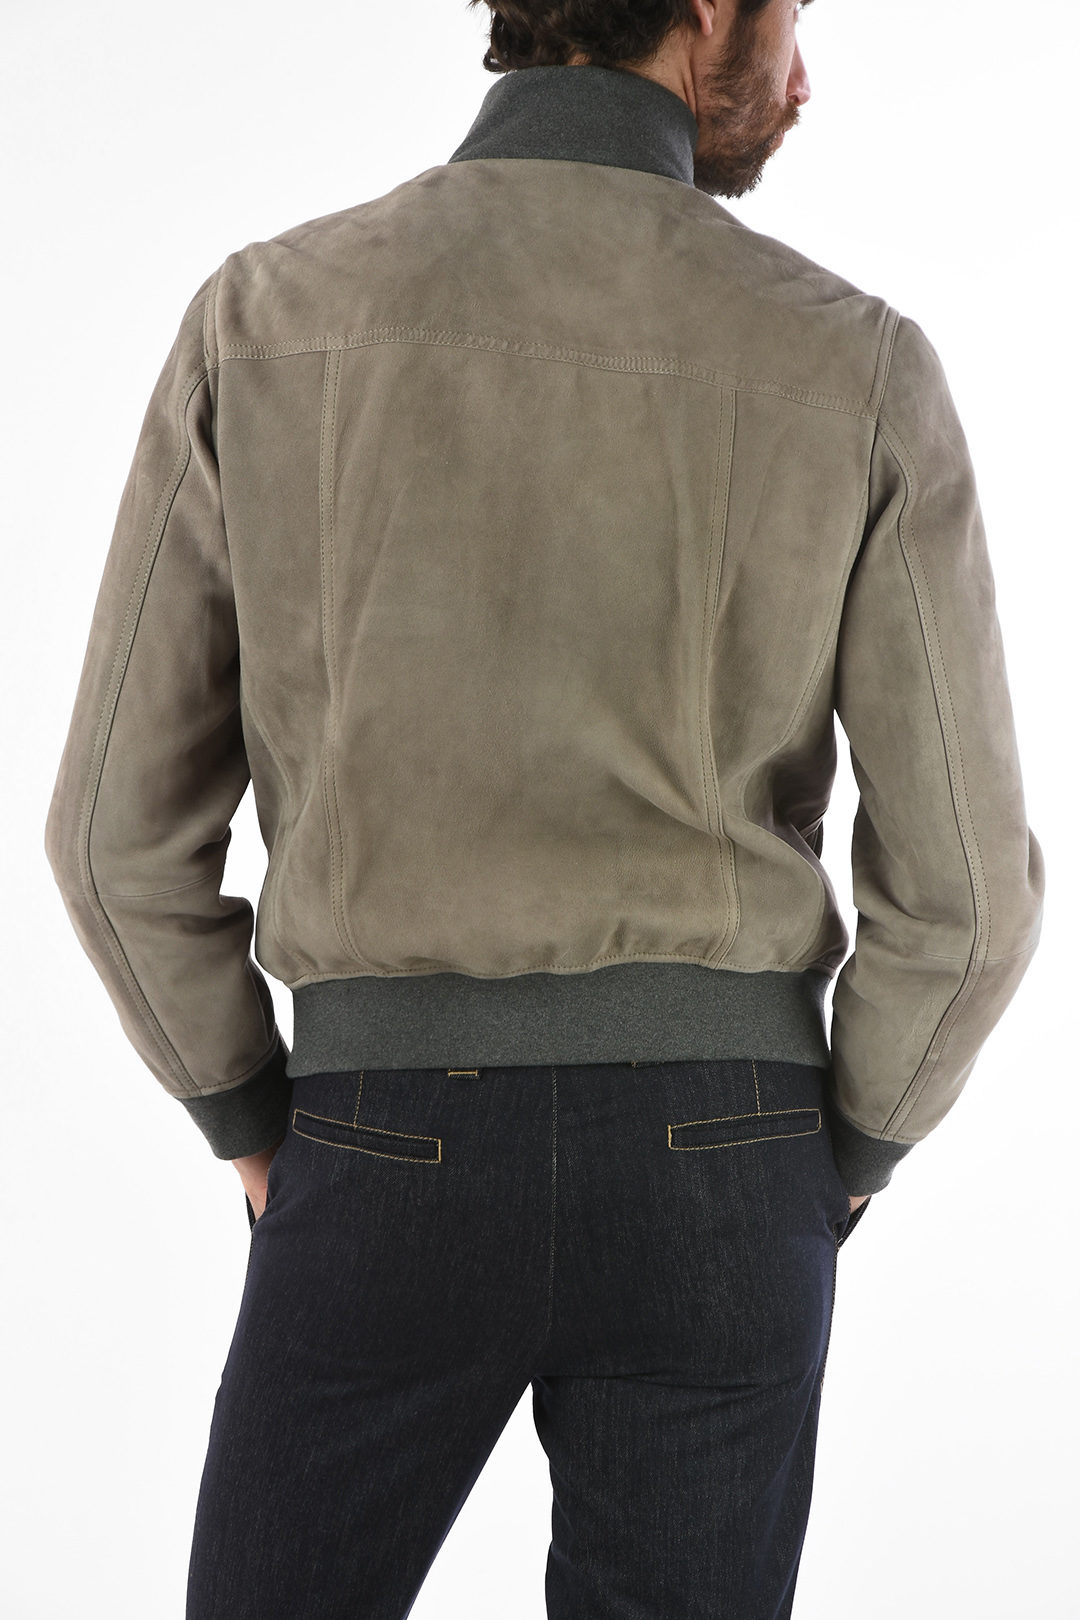 Brunello Cucinelli Suede Jacket with Patch Pockets men - Glamood Outlet